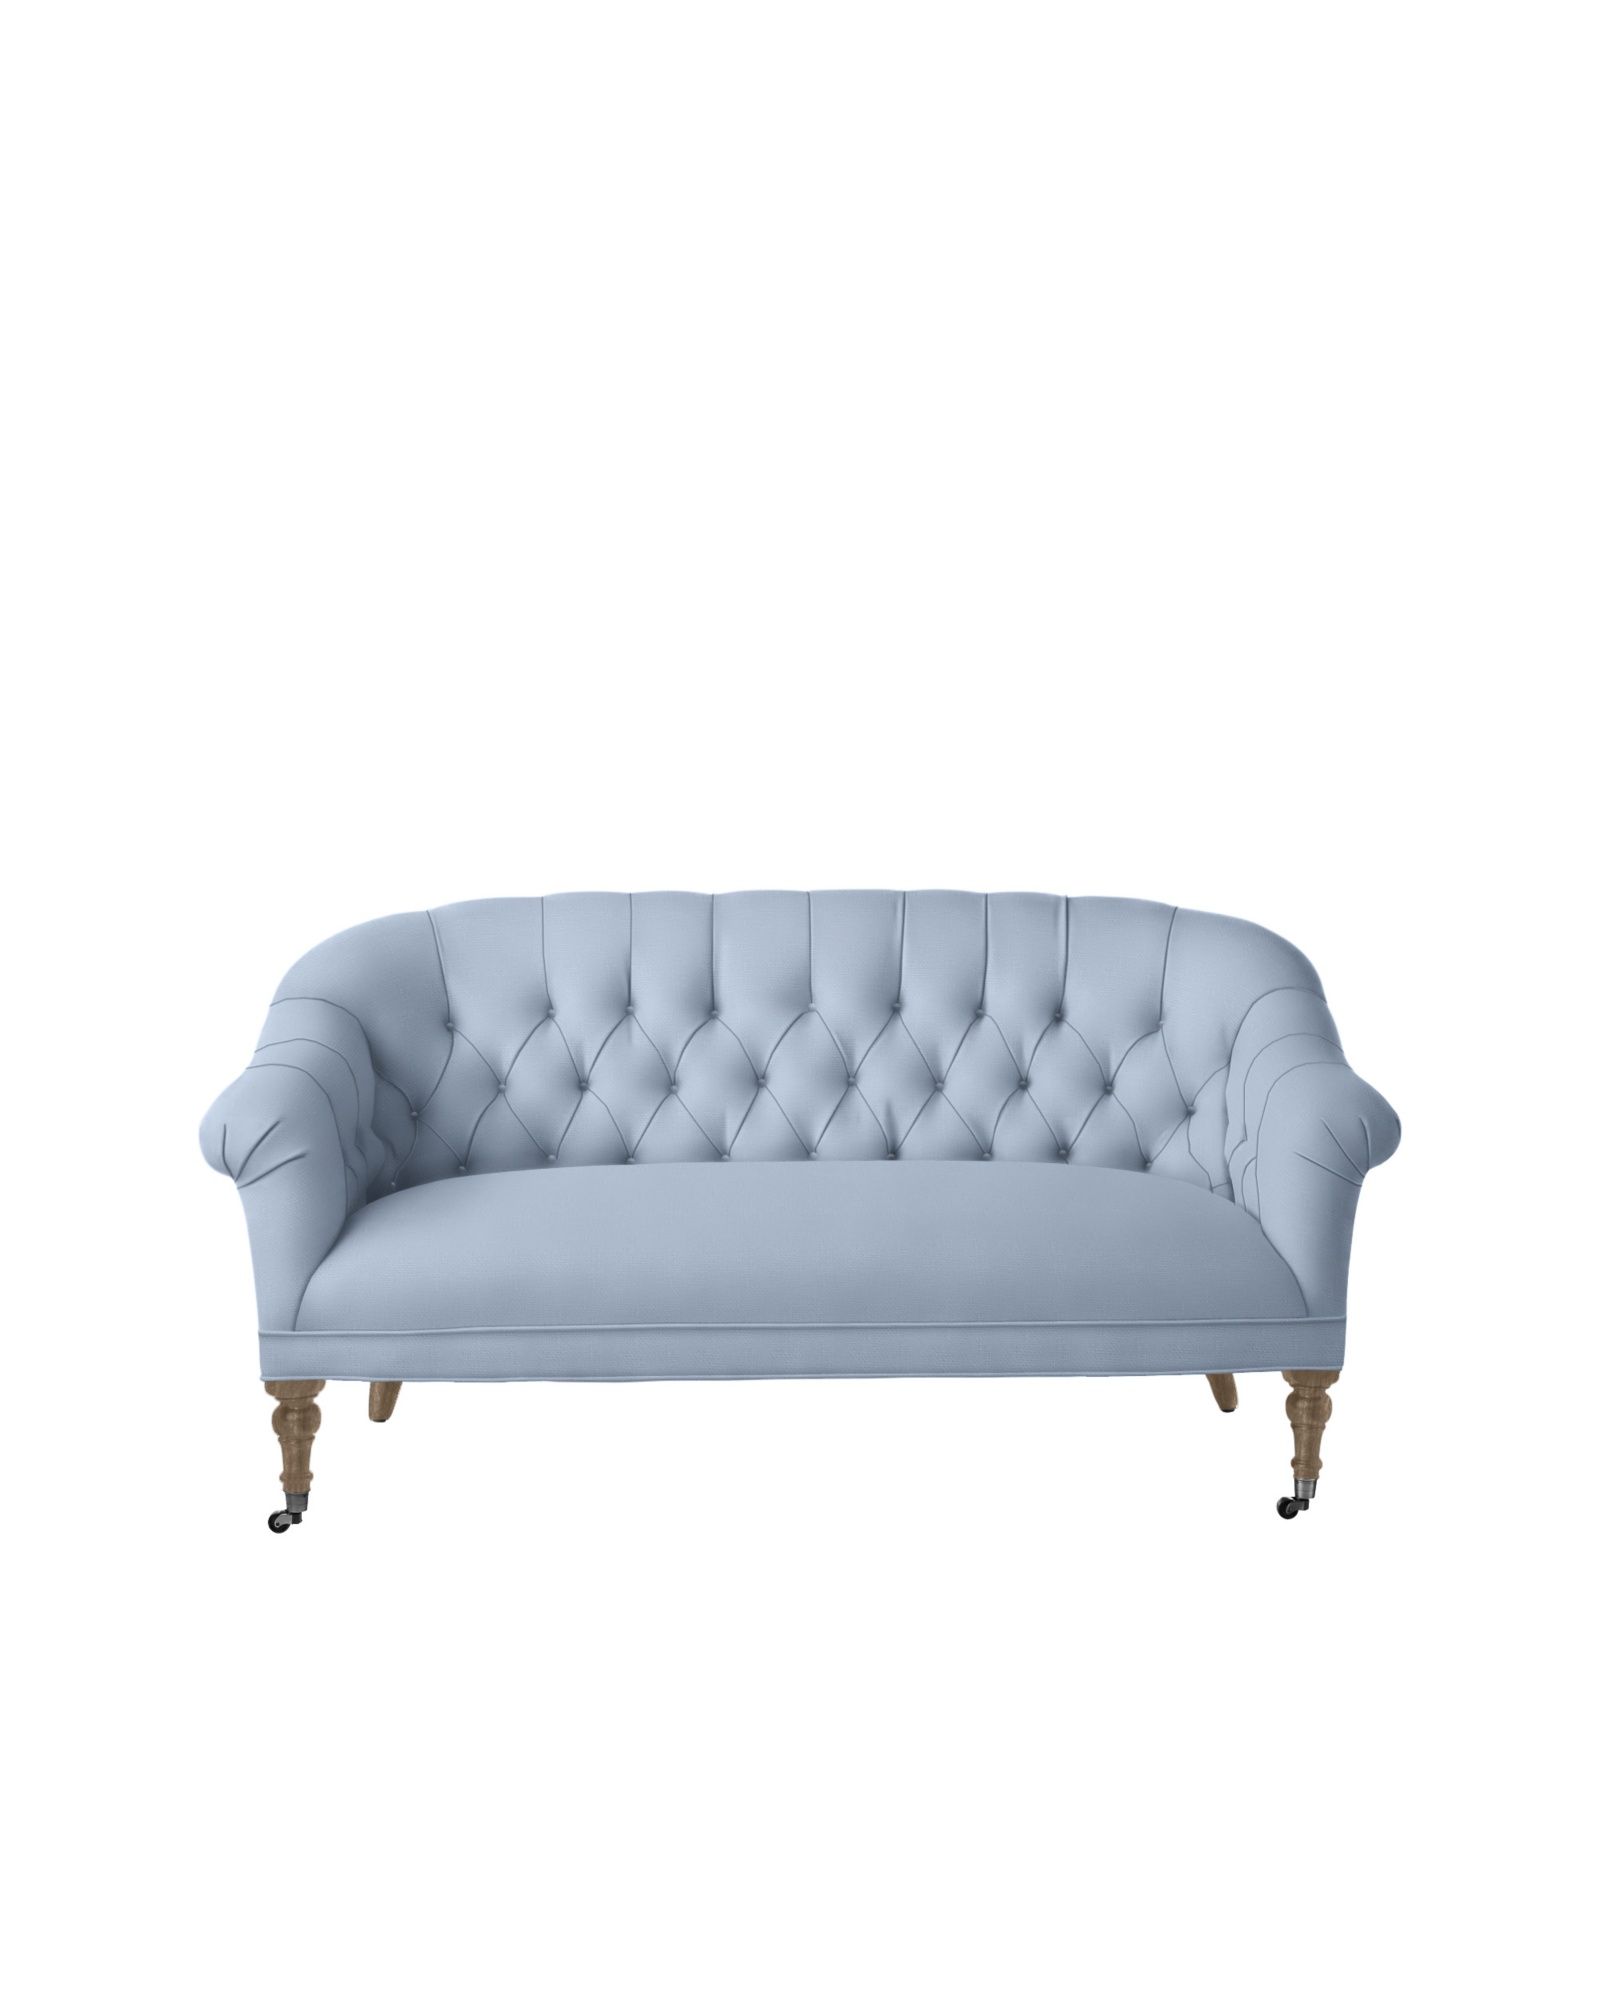 Paxton Tufted Loveseat | Serena and Lily